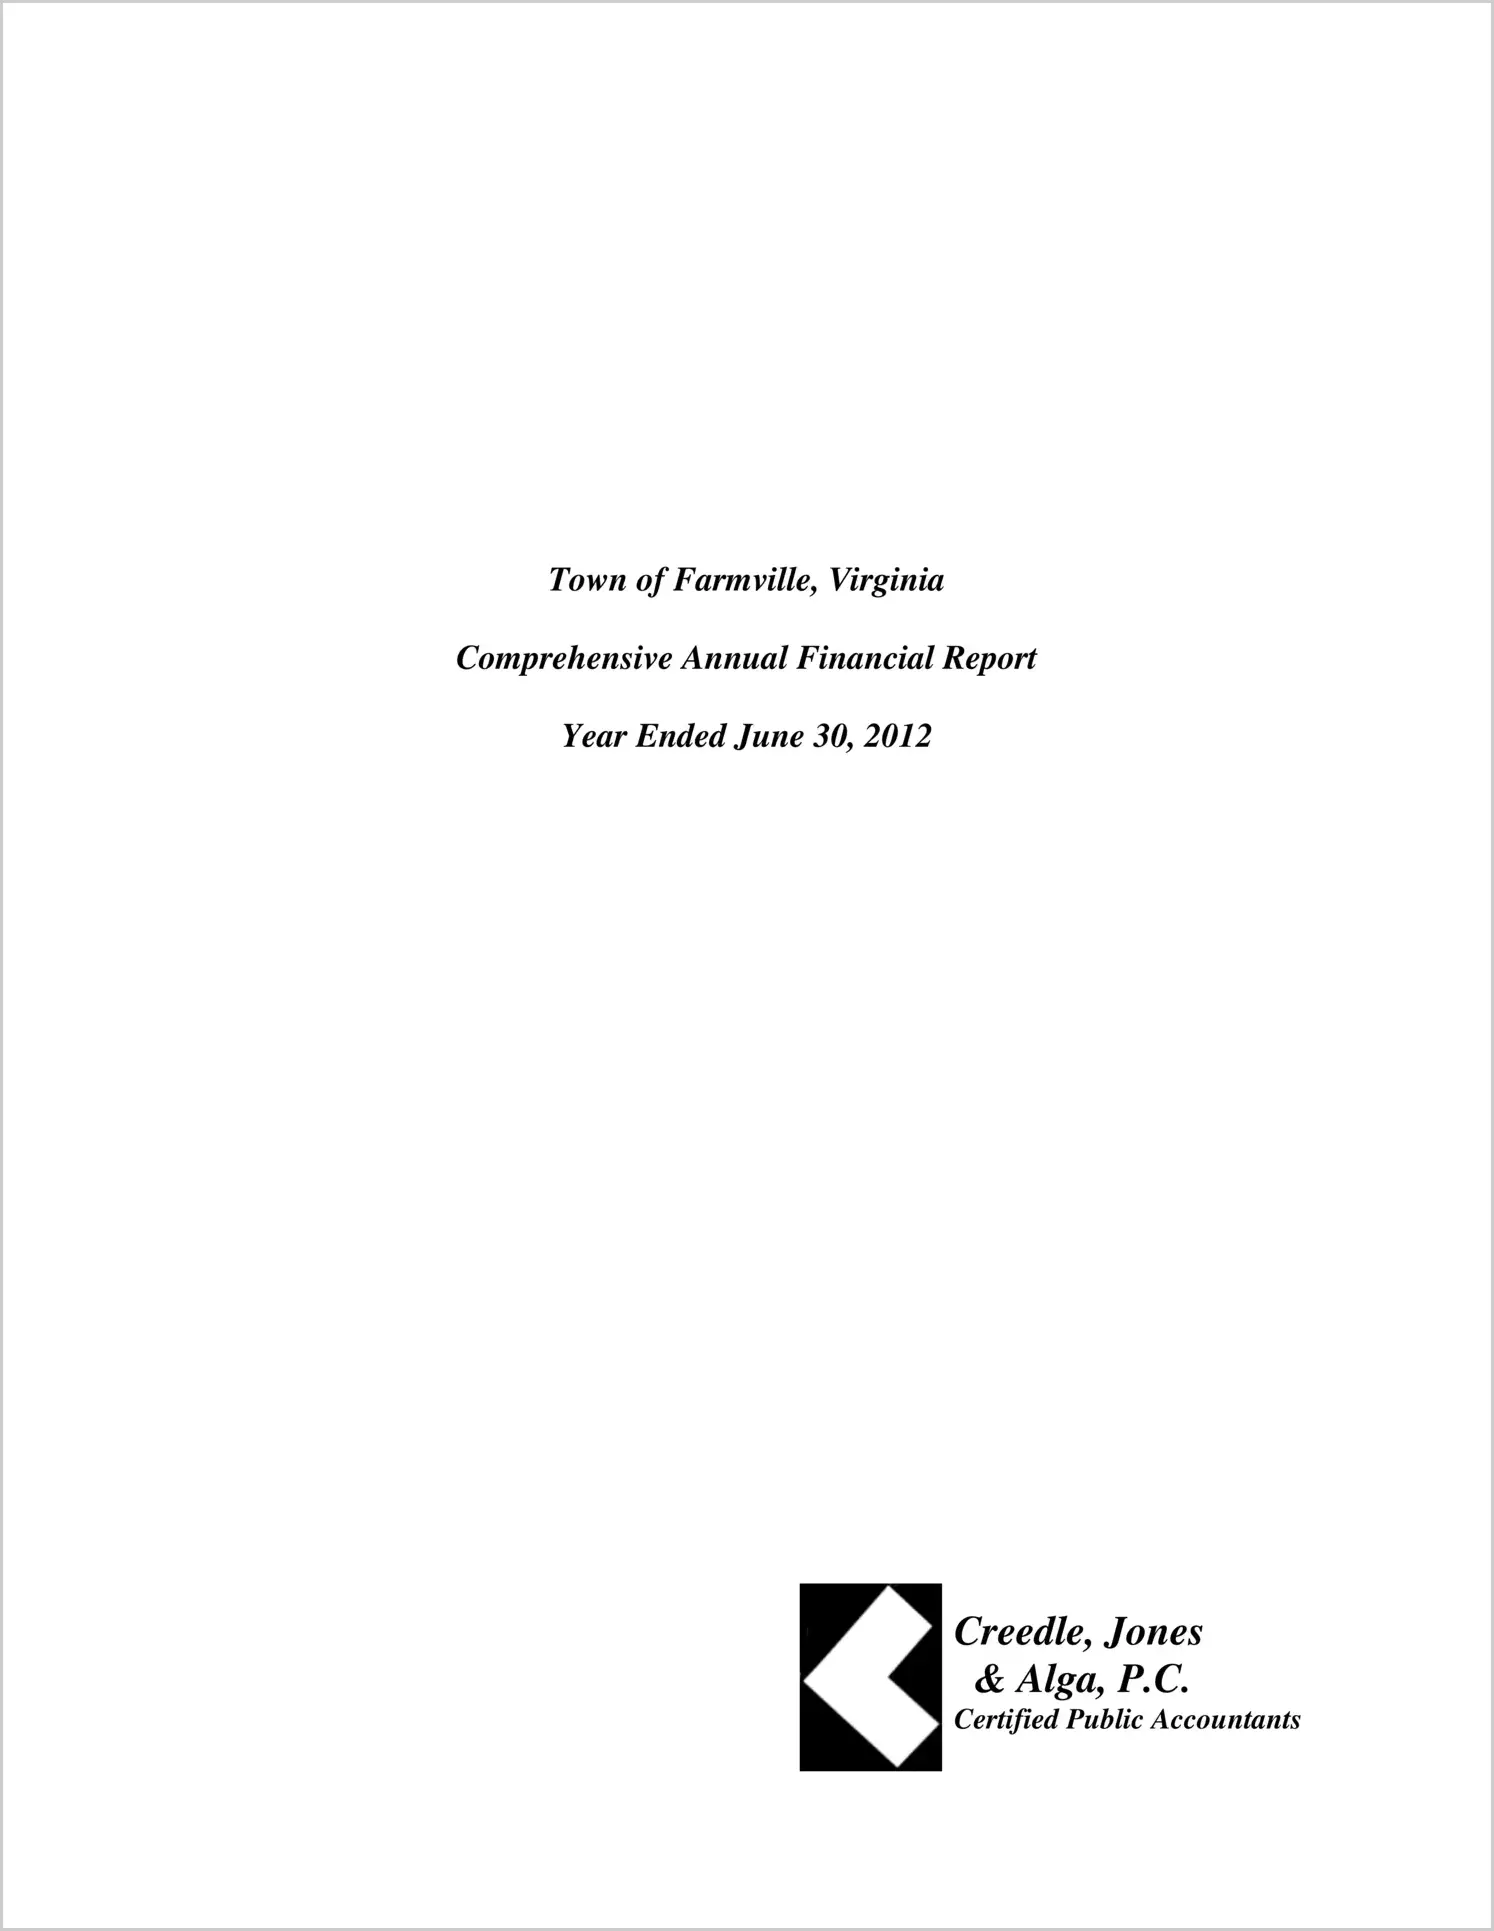 2012 Annual Financial Report for Town of Farmville